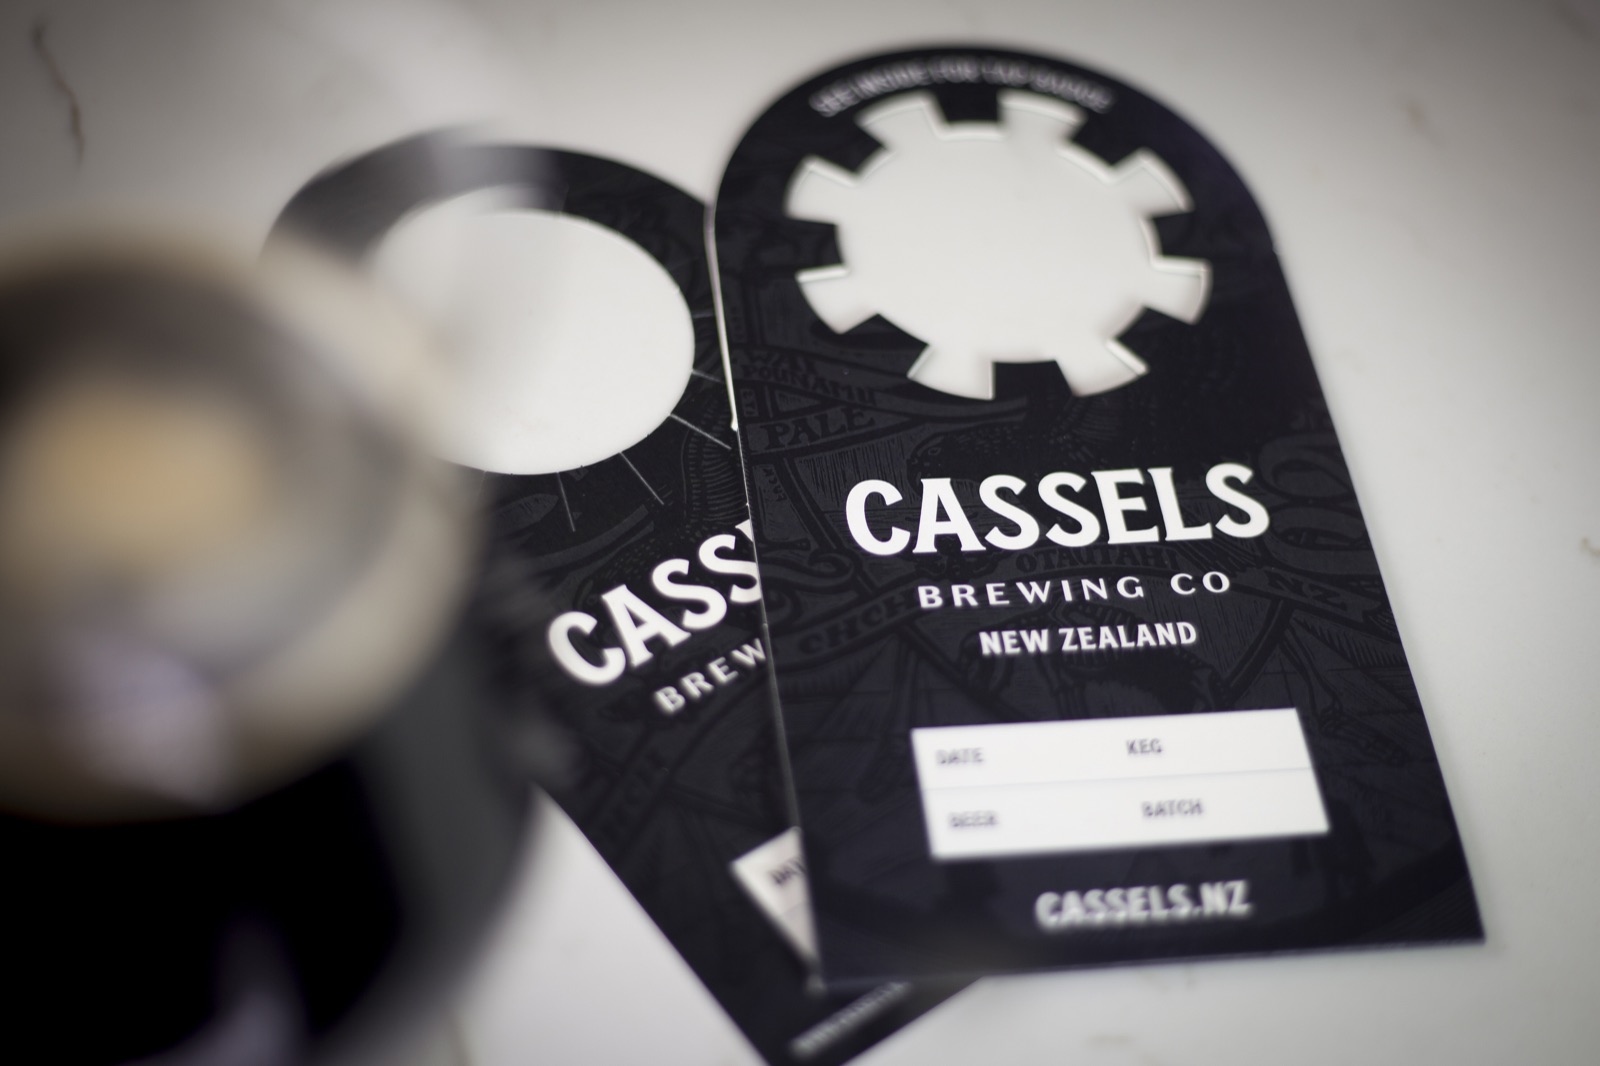 Printing Keg Collars for Cassel’s Brewery